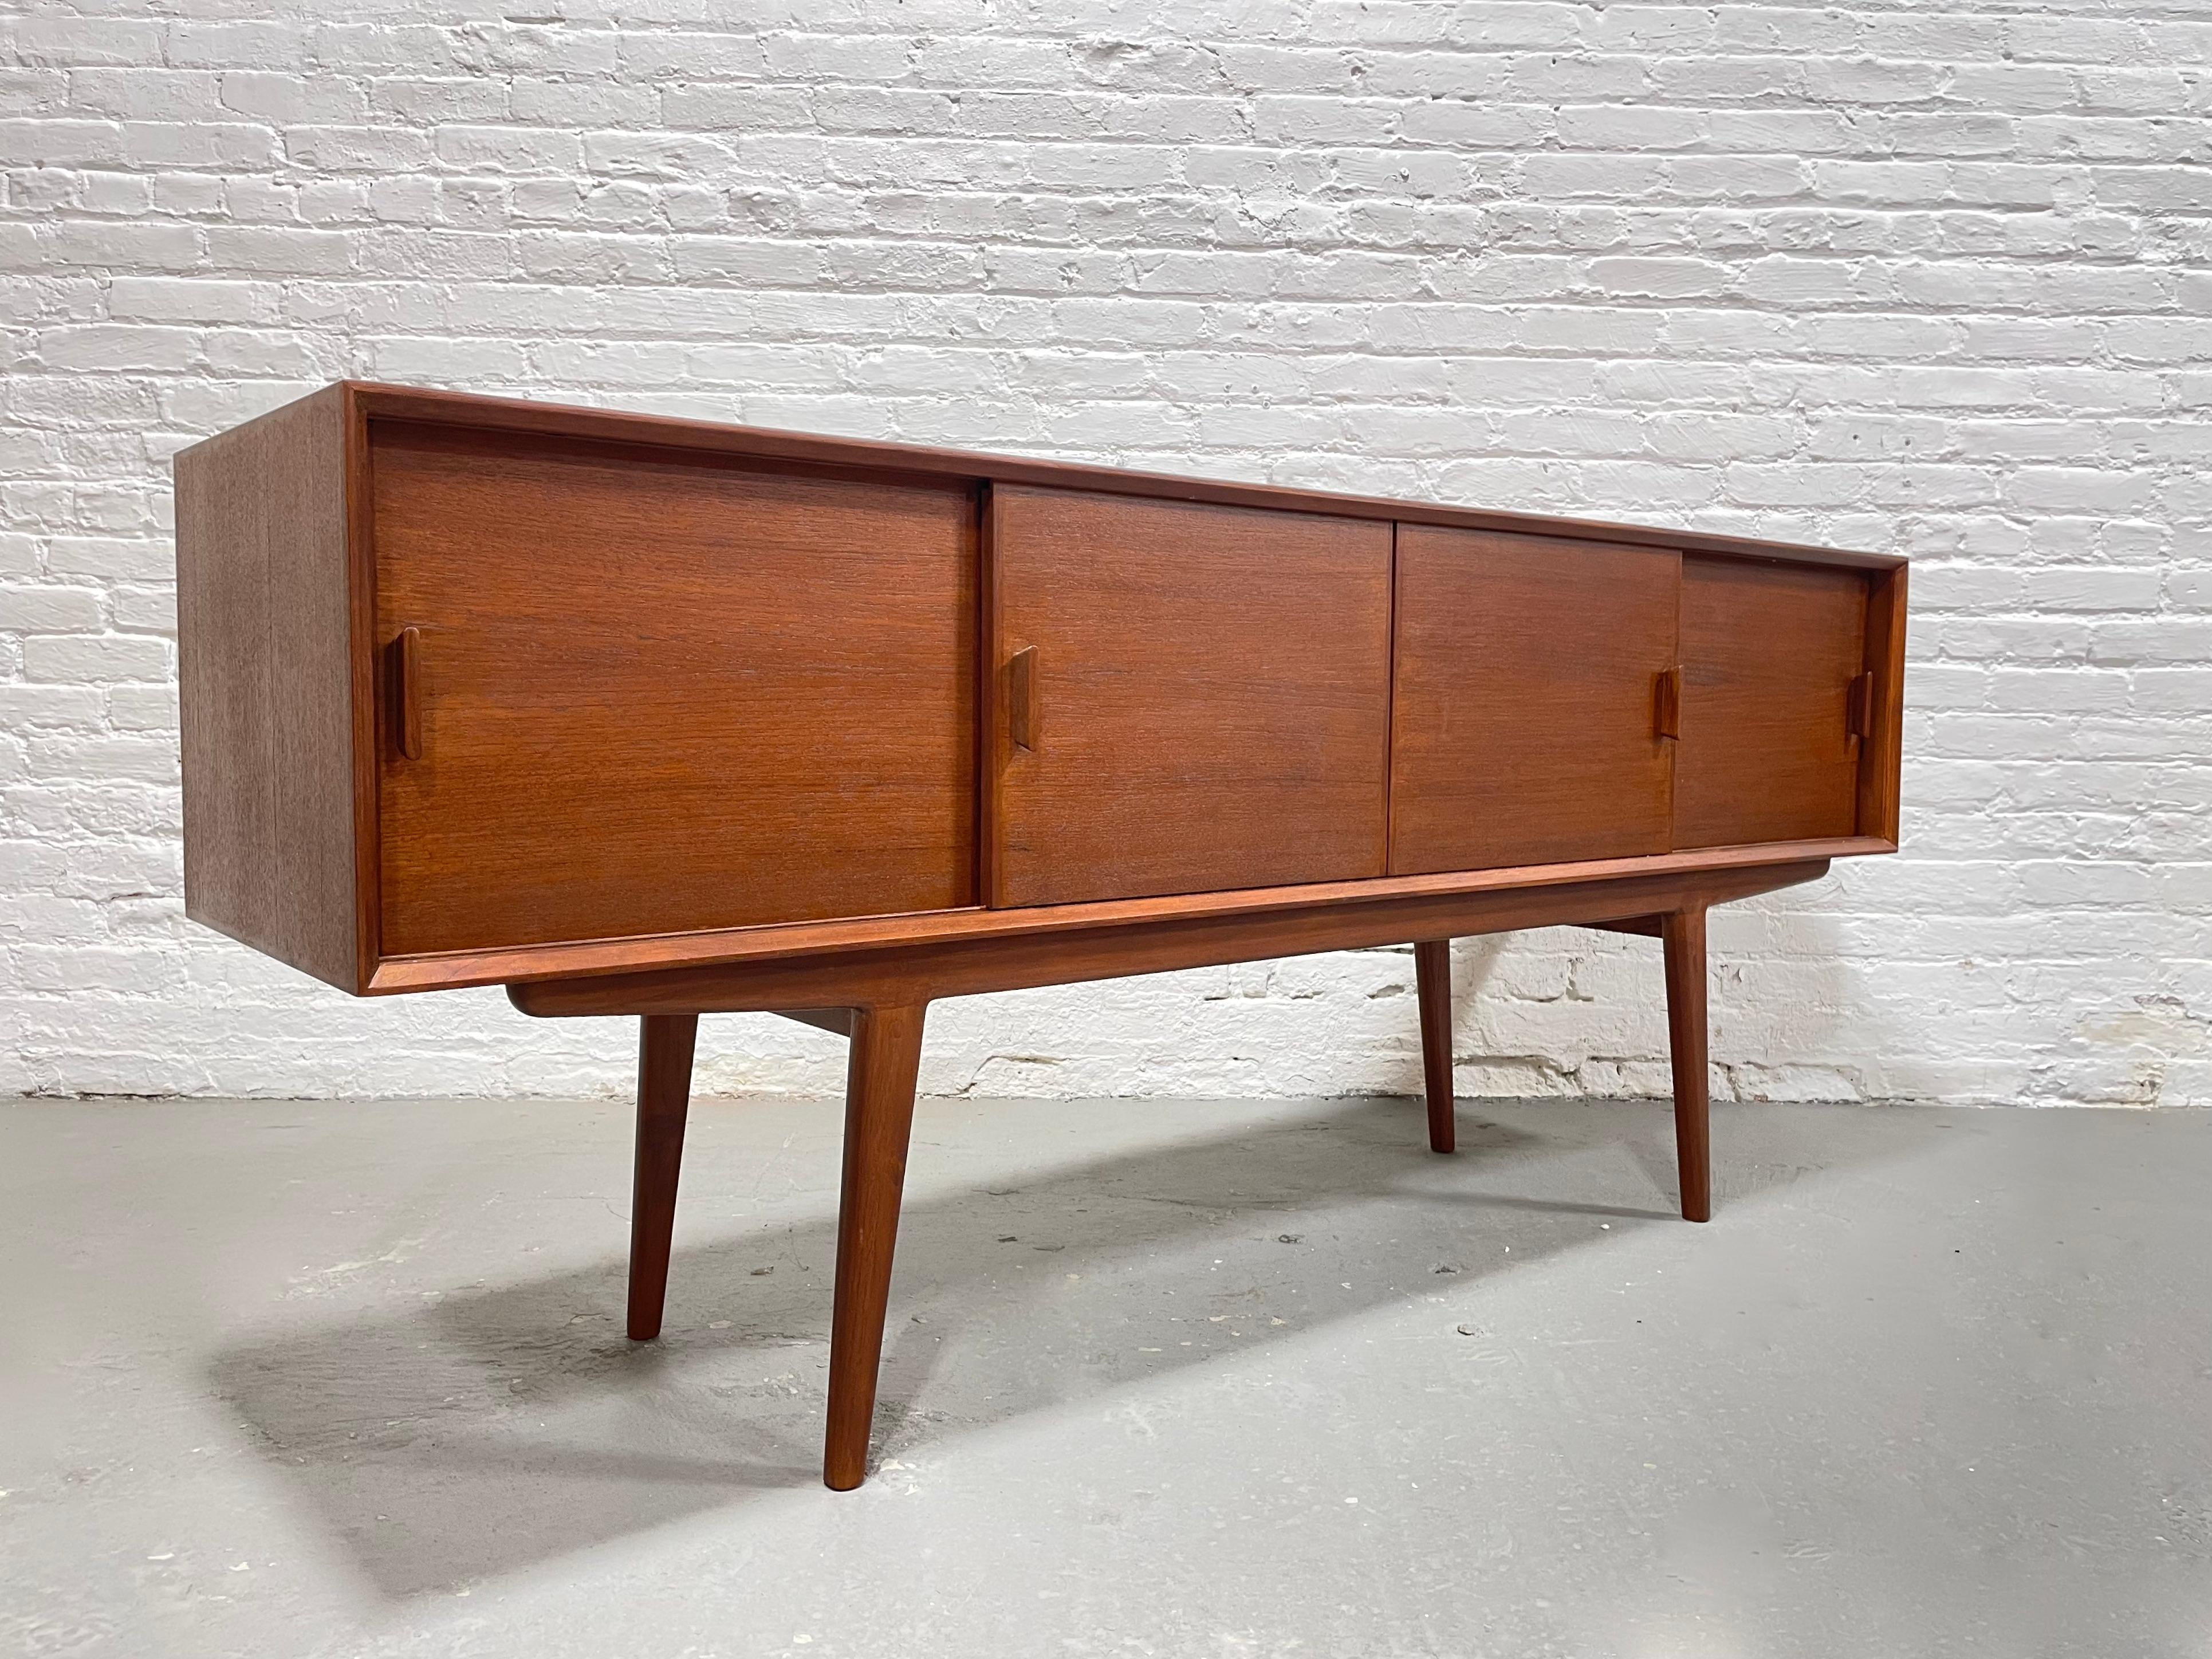 LONG + Sleek Handmade Mid Century MODERN styled CREDENZA media stand In New Condition For Sale In Weehawken, NJ